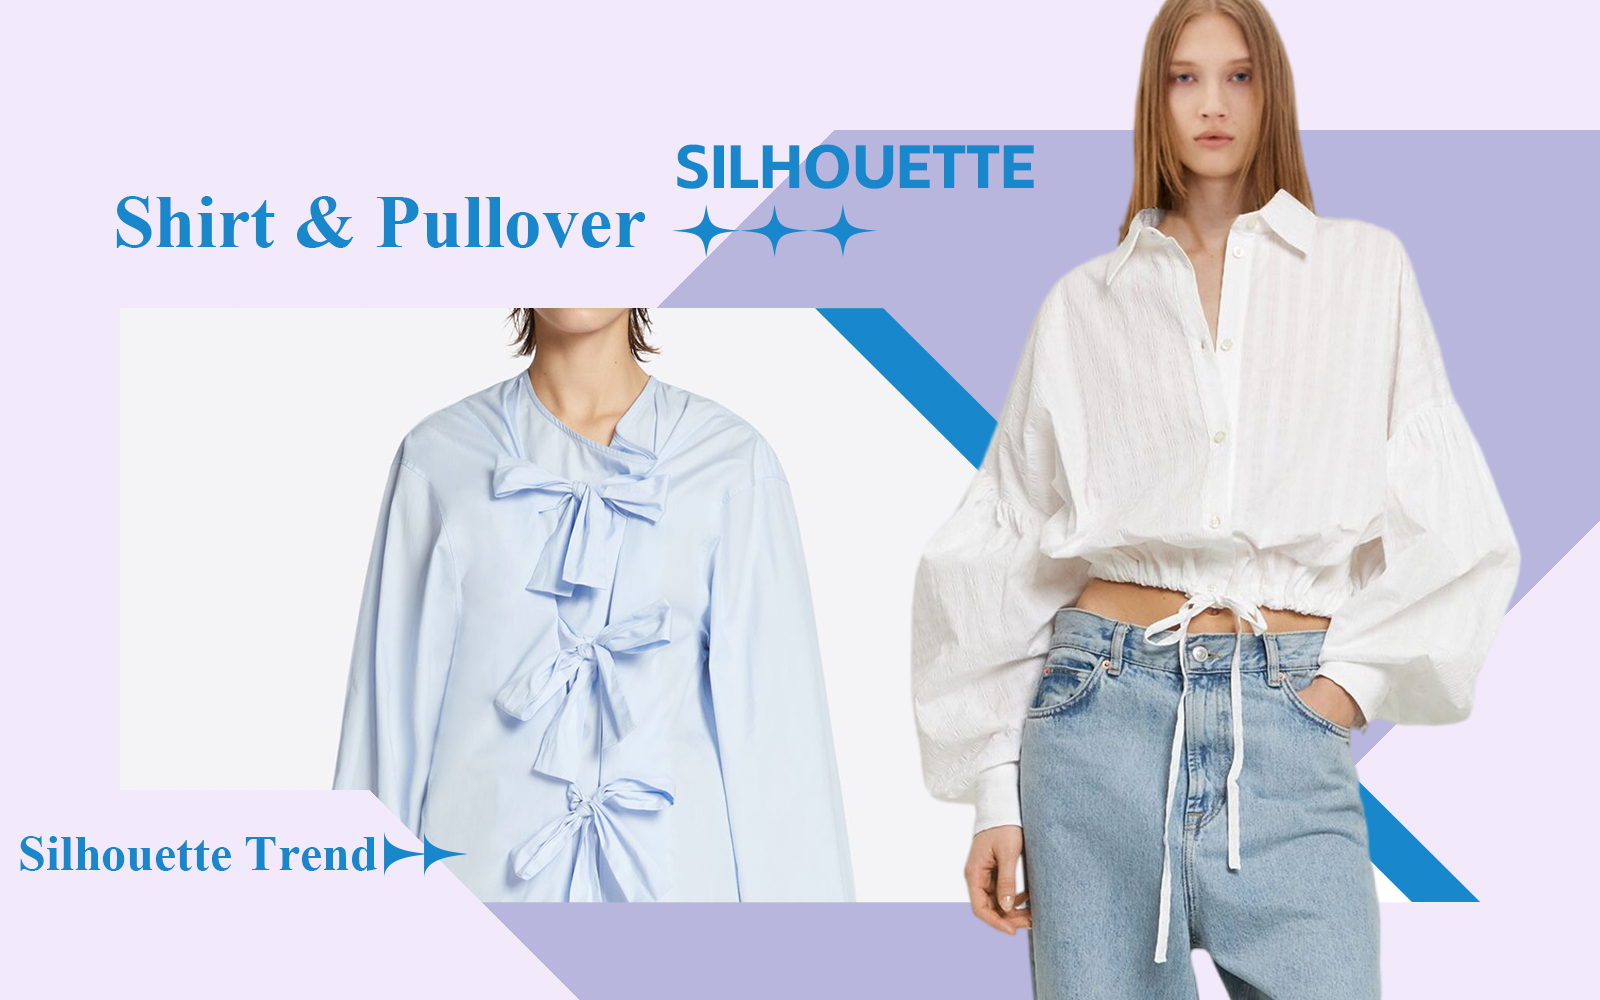 Leisure and Comfortable -- The Silhouette Trend for Women's Shirt & Pullover